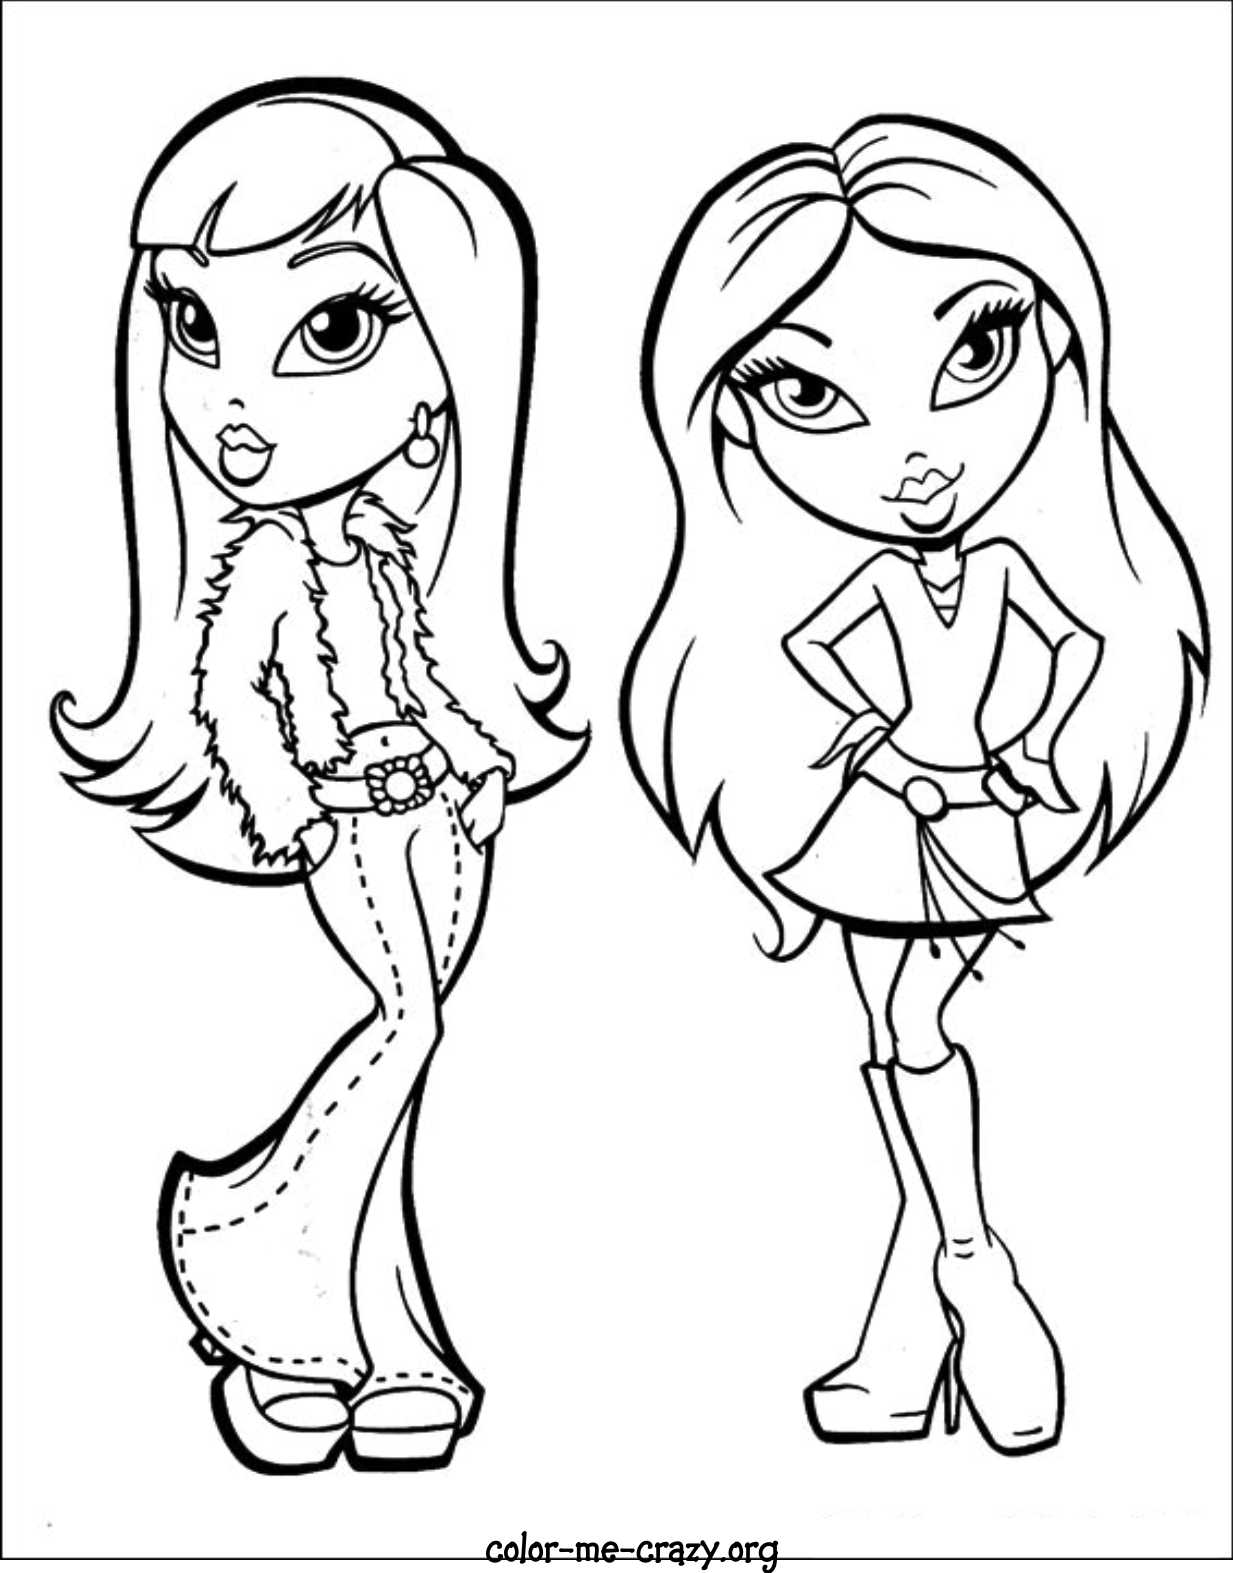 Bratz Coloring Page Bratz Coloring Page Bratz Printable Coloring Home Images And Photos Finder